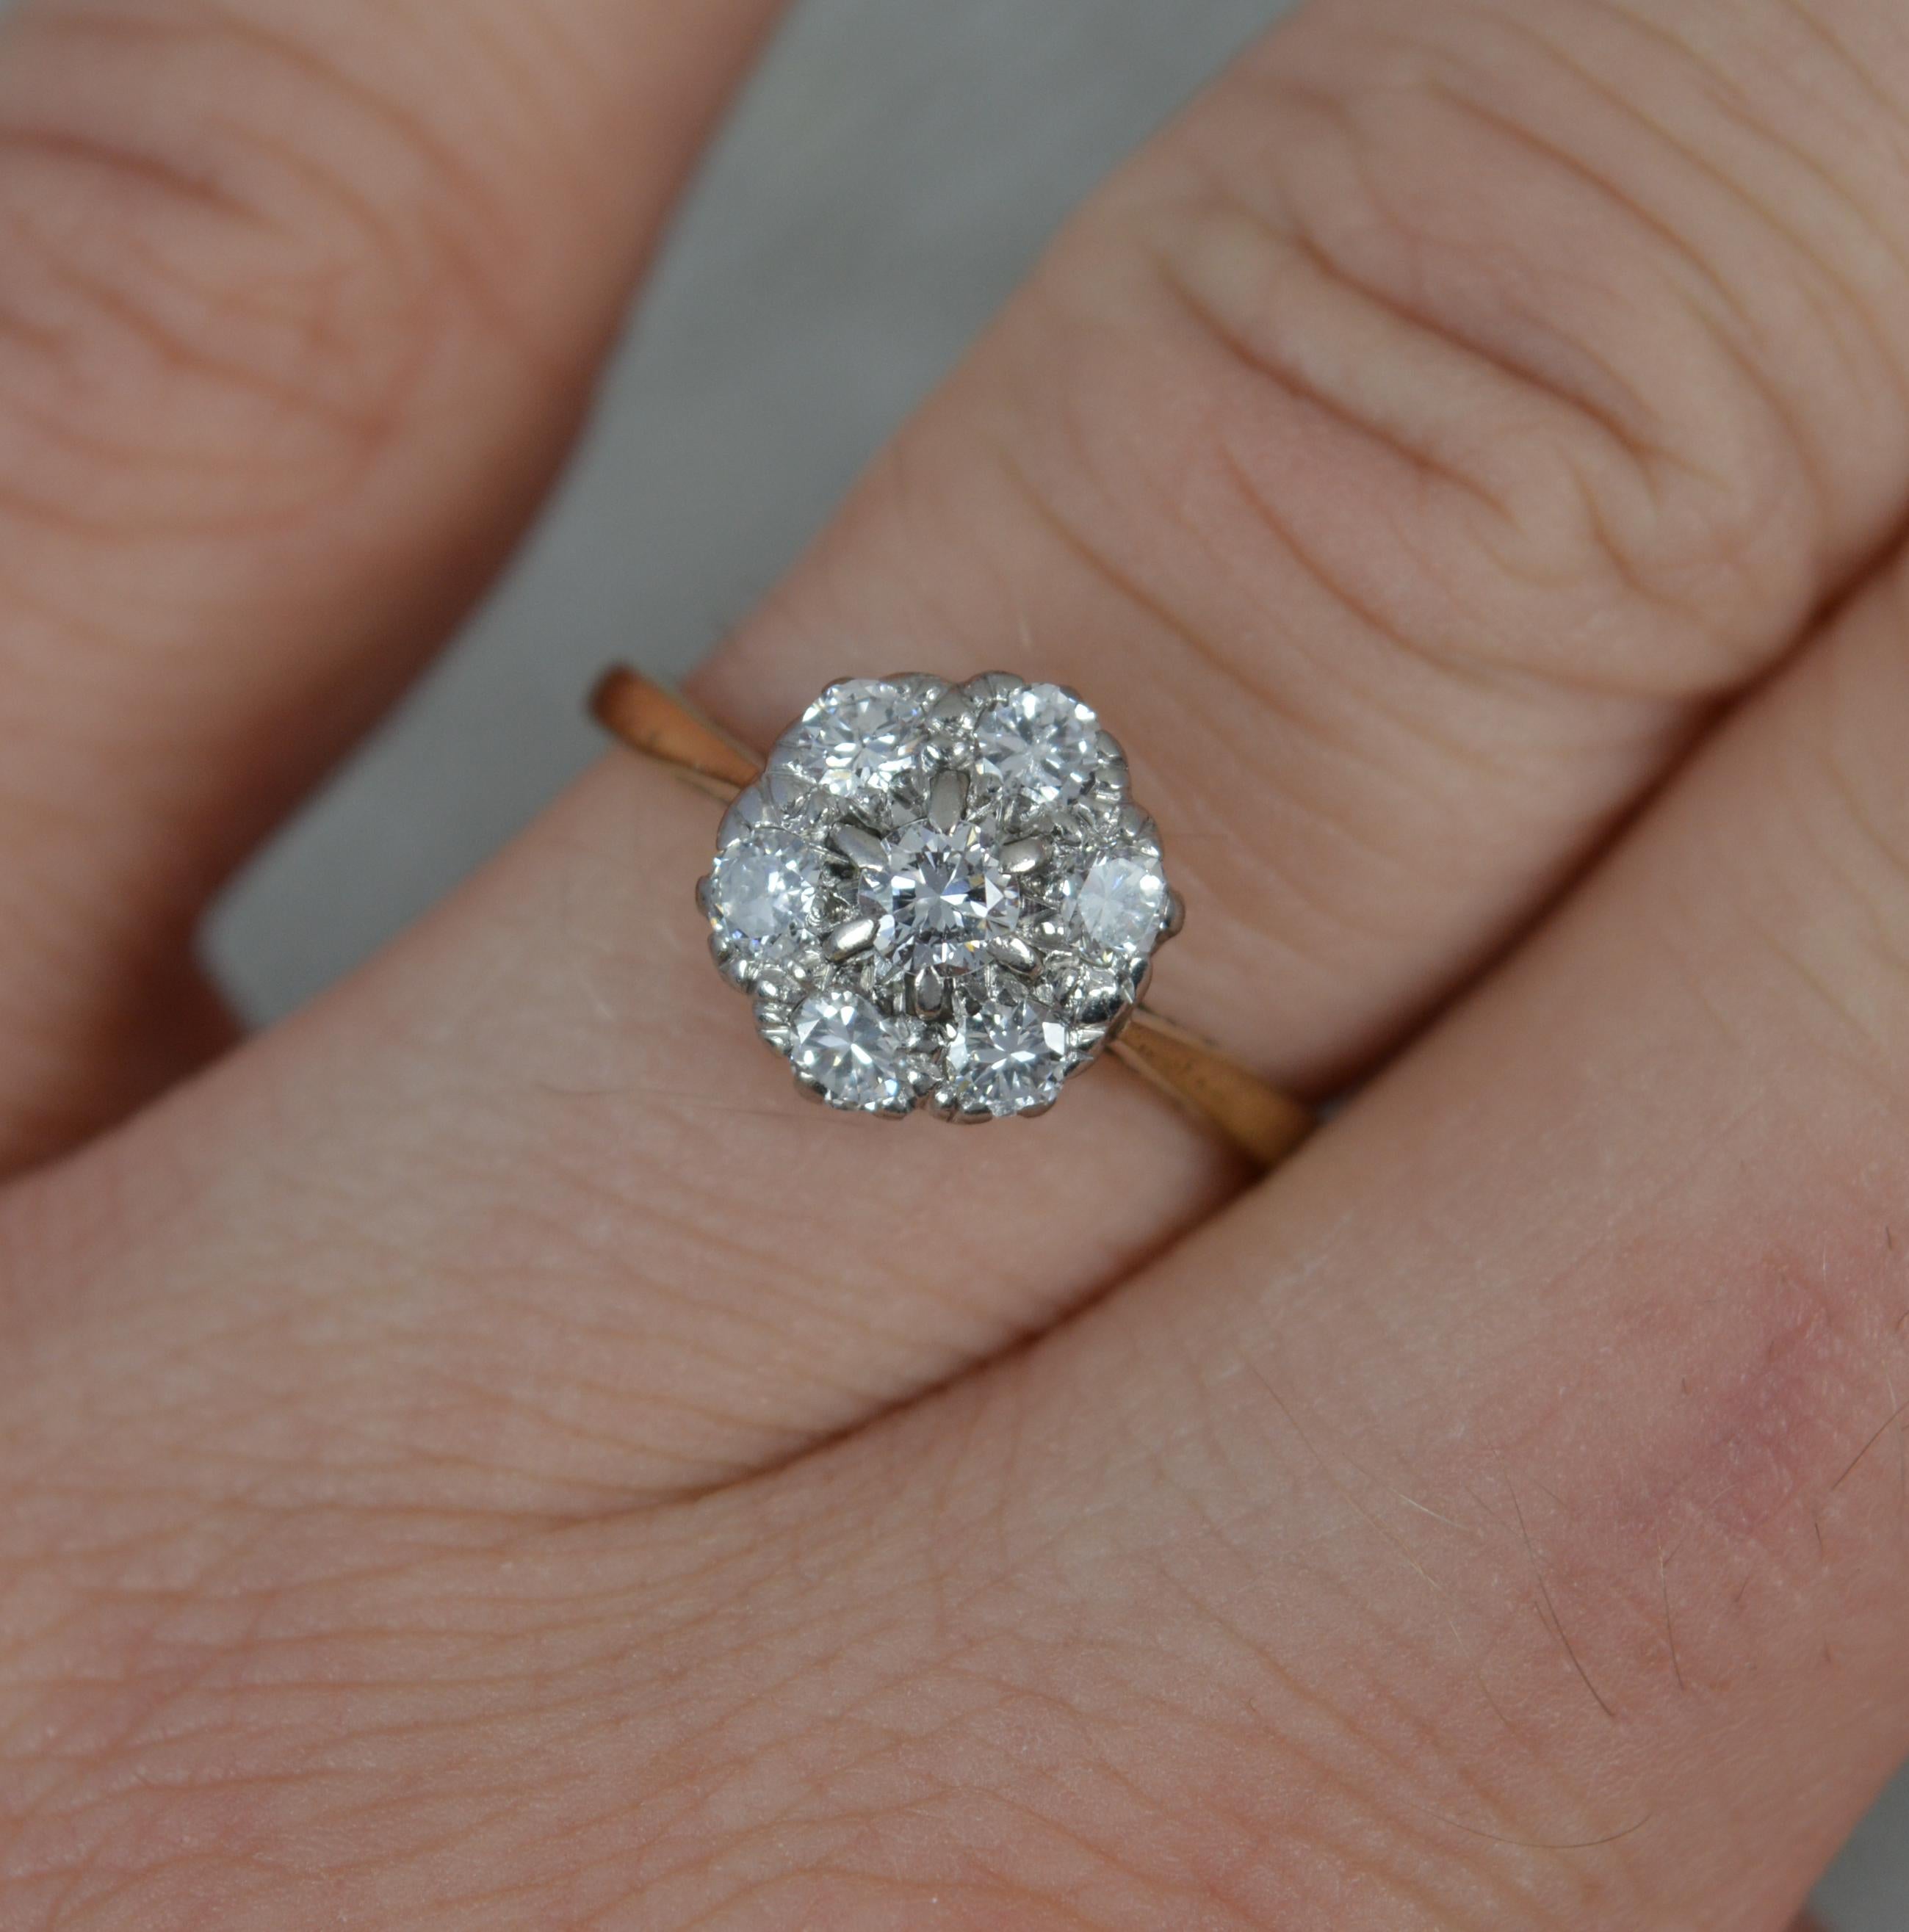 A superb diamond ring circa 1950.
Solid 18 carat yellow gold shank with platinum head setting.
Designed with a cluster of seven round cut diamonds to total 0.55cts approx. Very clean, white and sparkly.
8.8mm x 9.8mm cluster head.

CONDITION ; Very